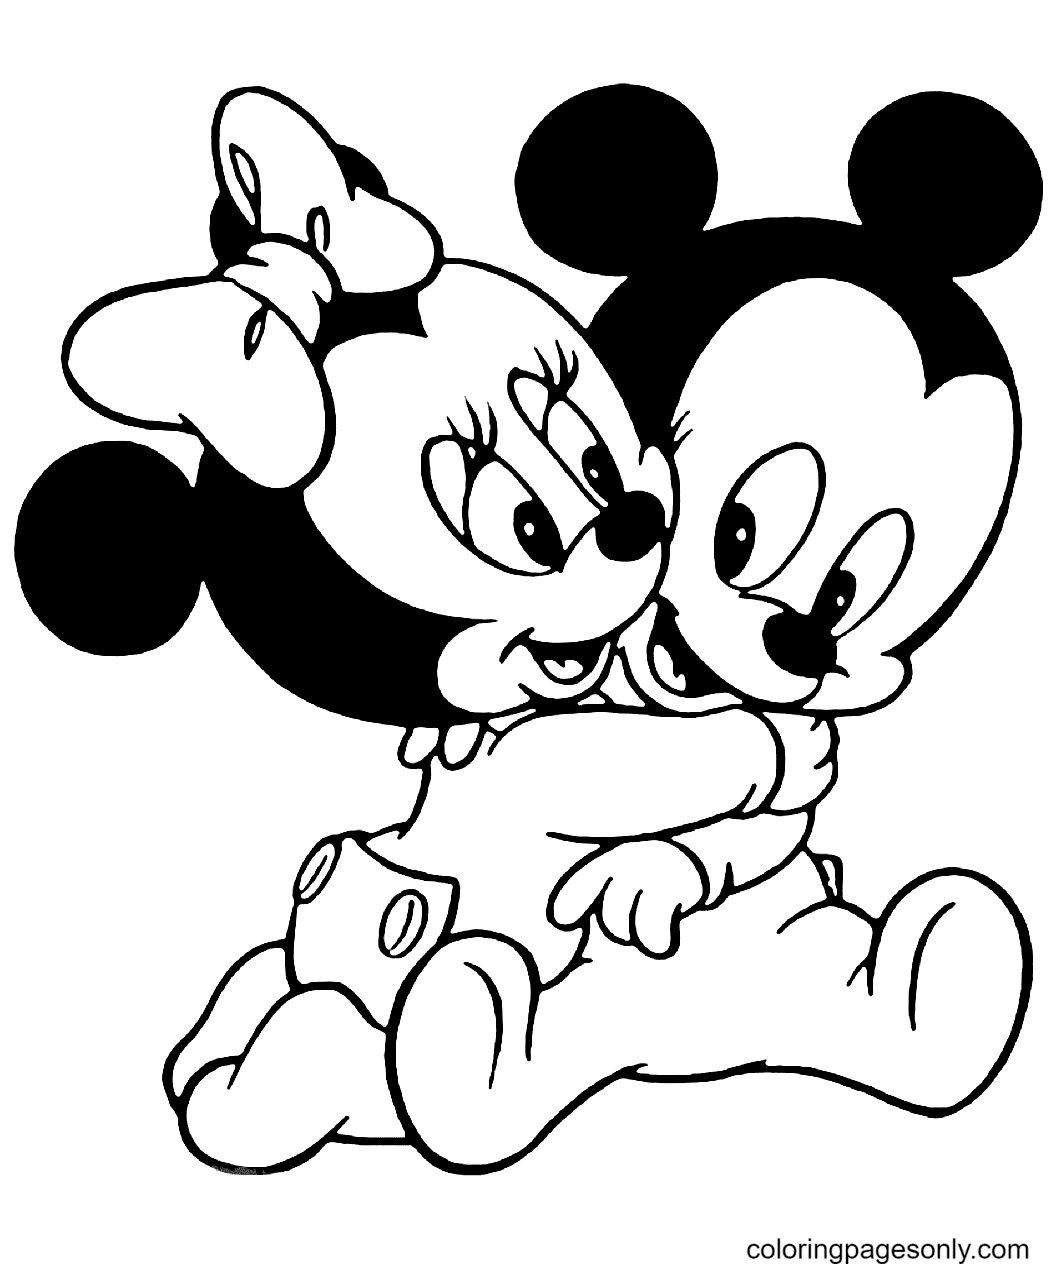 How to Draw Minnie Mouse (Full Body)